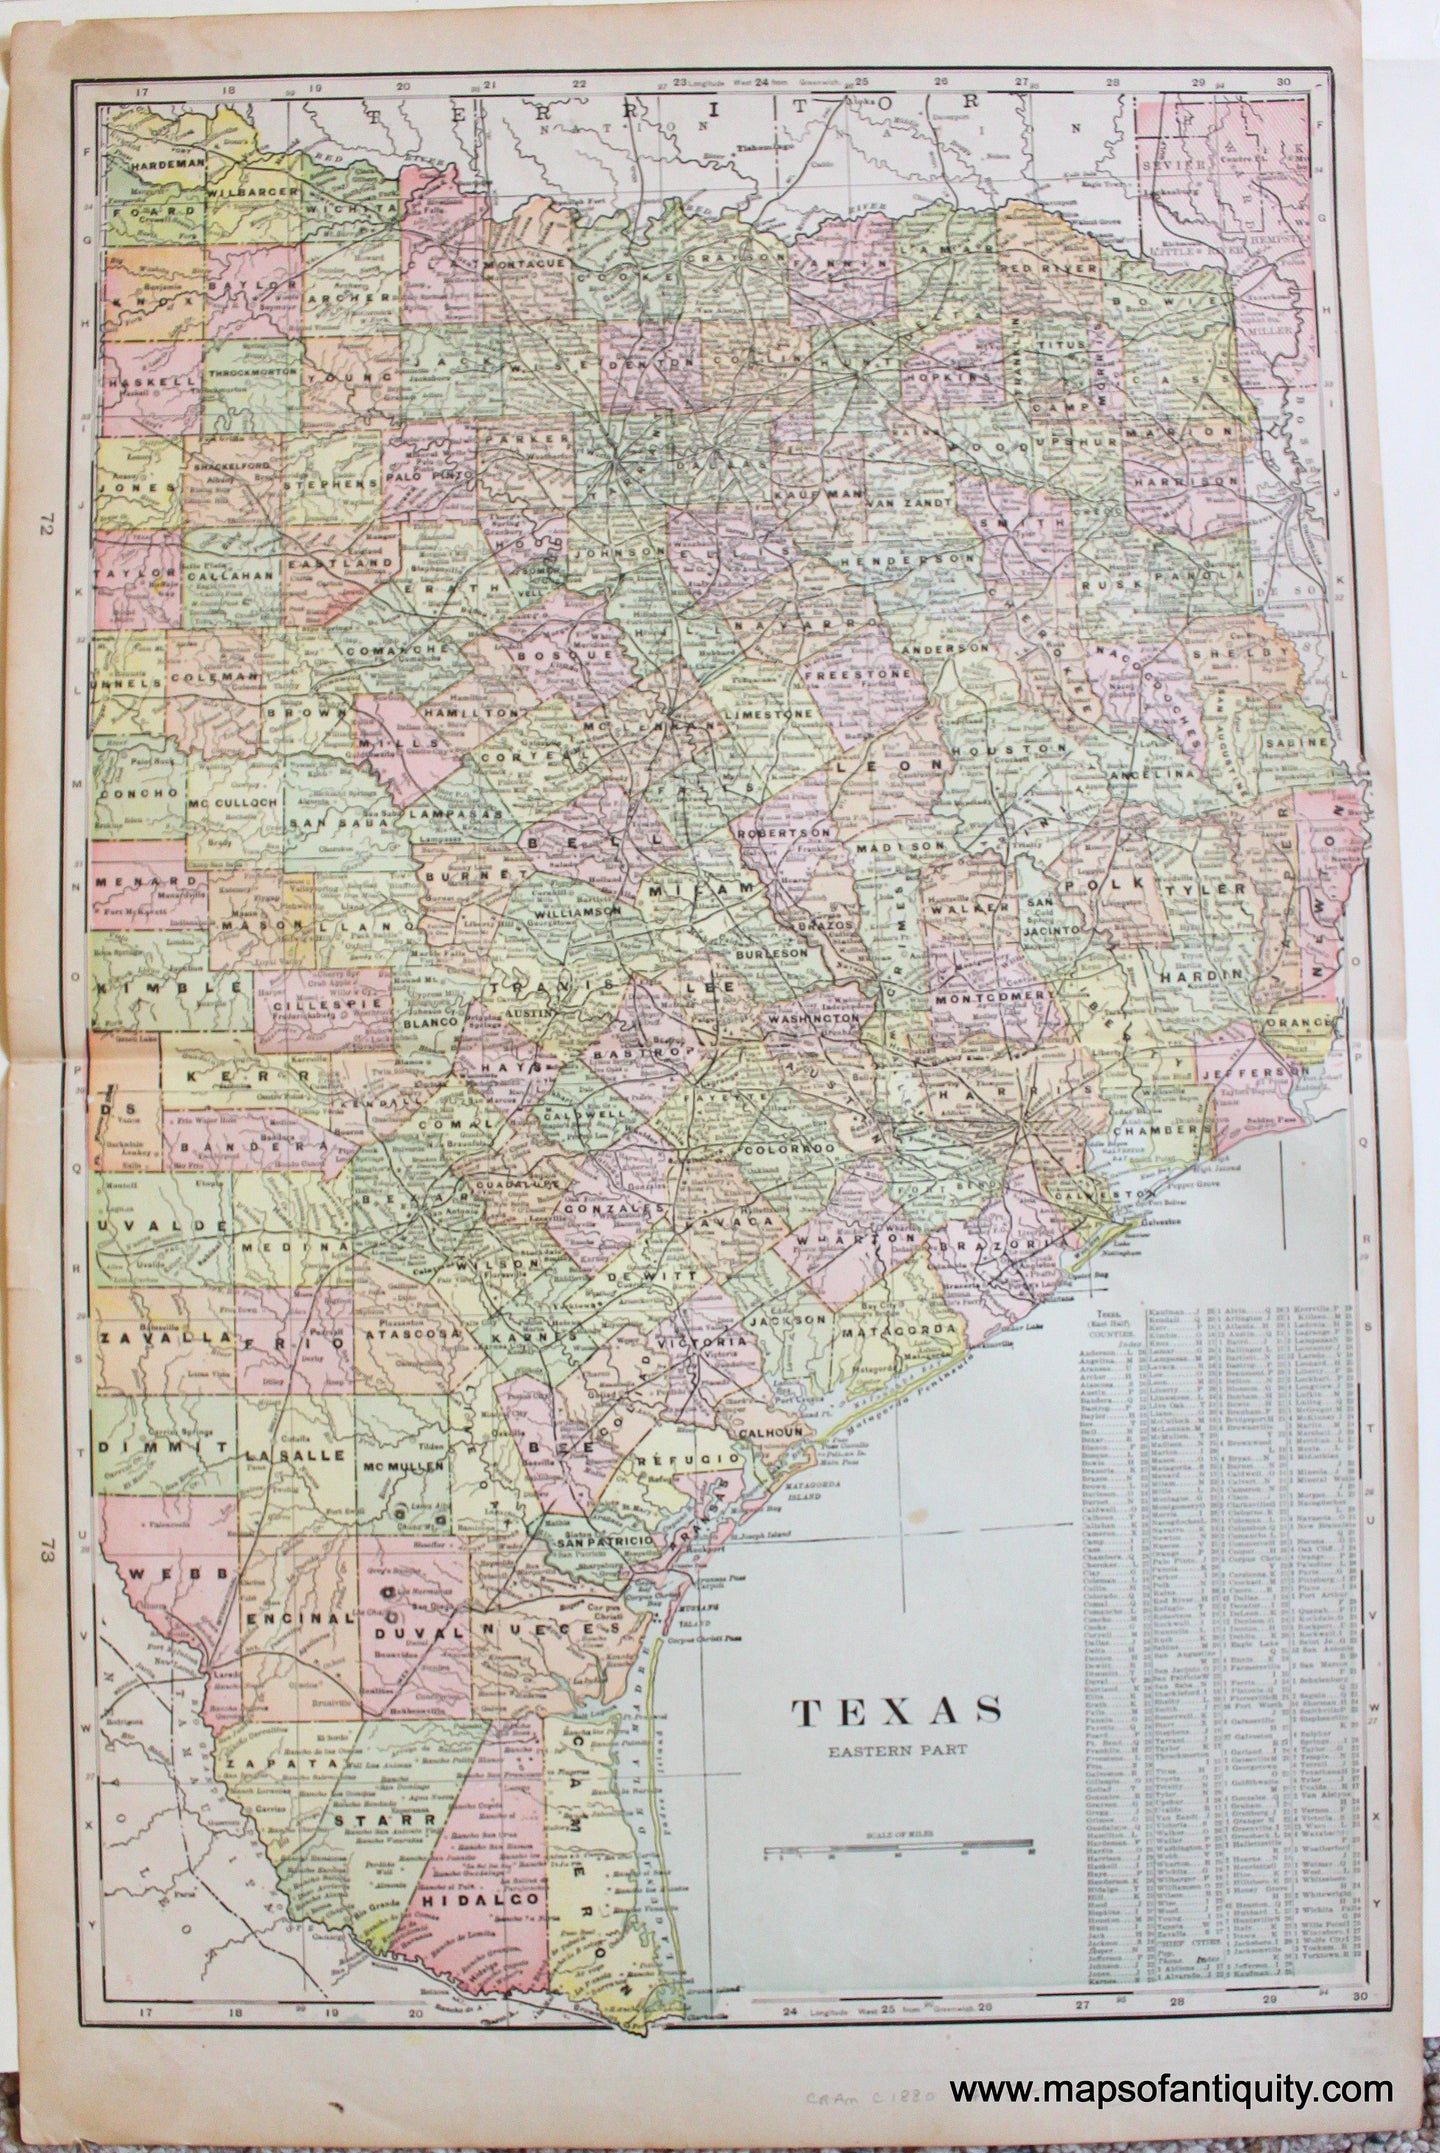 Antique-Printed-Color-Map-Texas-Eastern-Part-c.-1880-Cram-South-Texas-1800s-19th-century-Maps-of-Antiquity